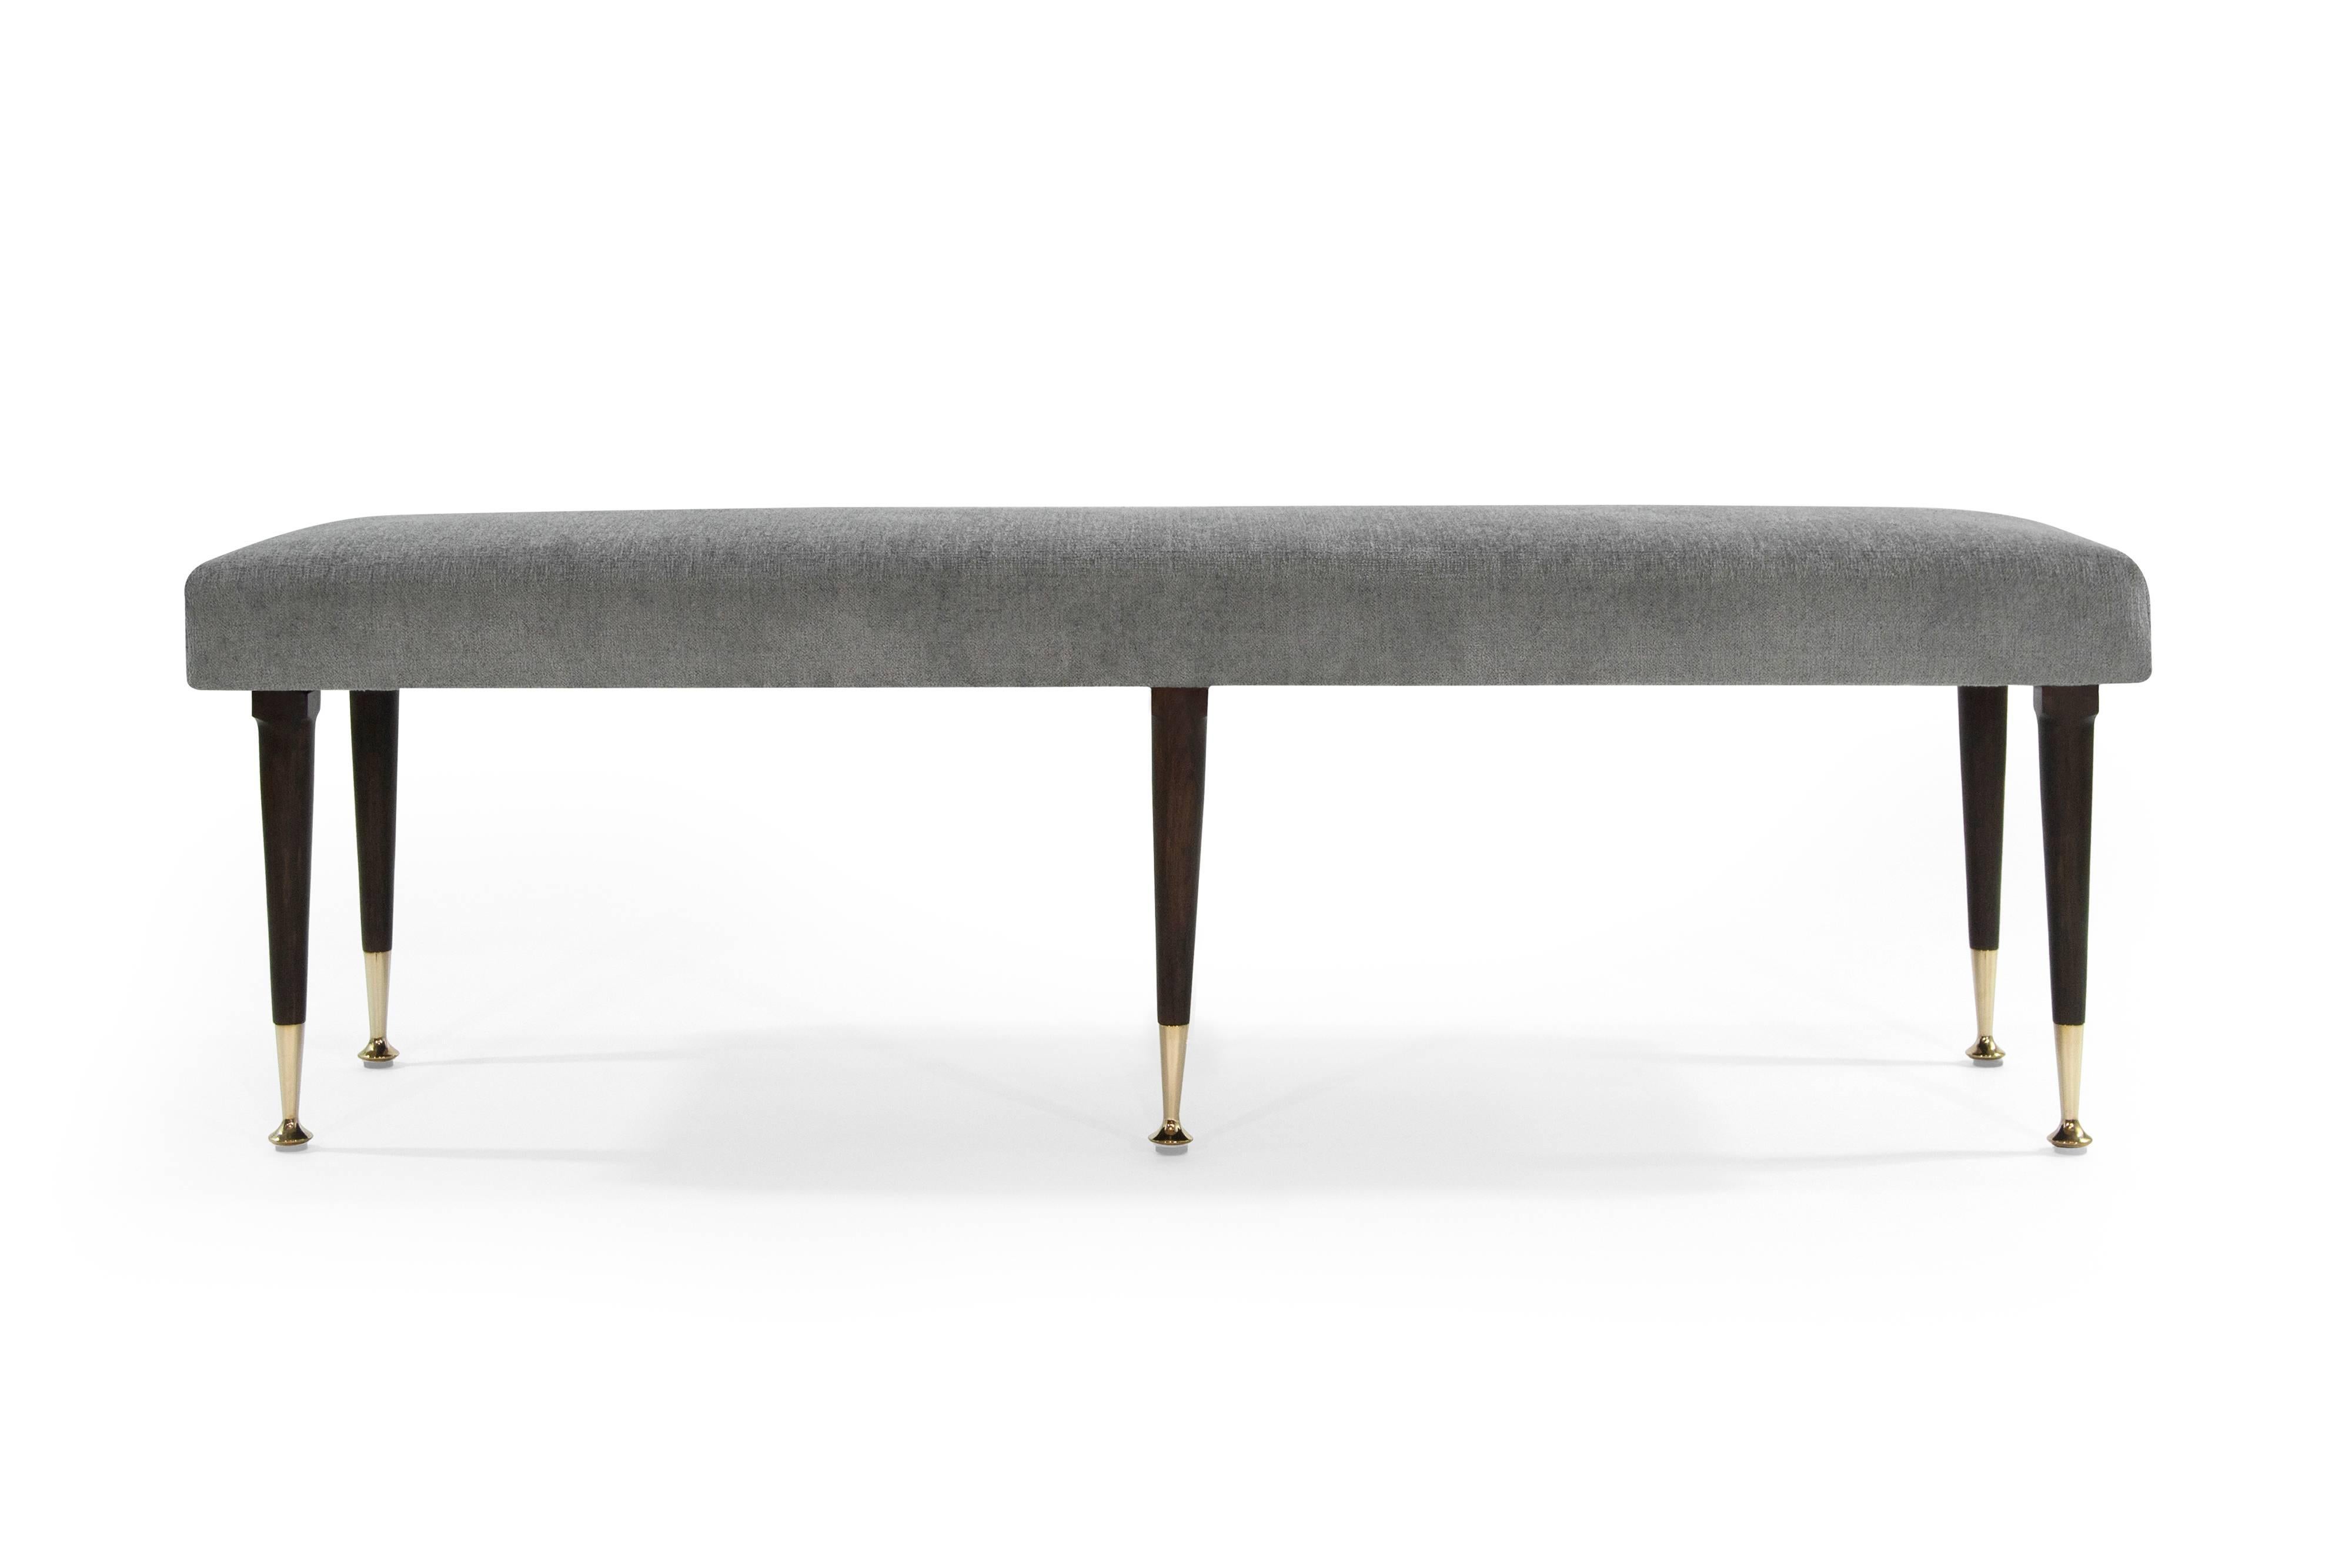 Fully restored 1950s bench. Boasts clean lines; newly upholstered in grey chenille. Fully restored walnut legs ending in stylish brass sabots. In style of Gio Ponti.